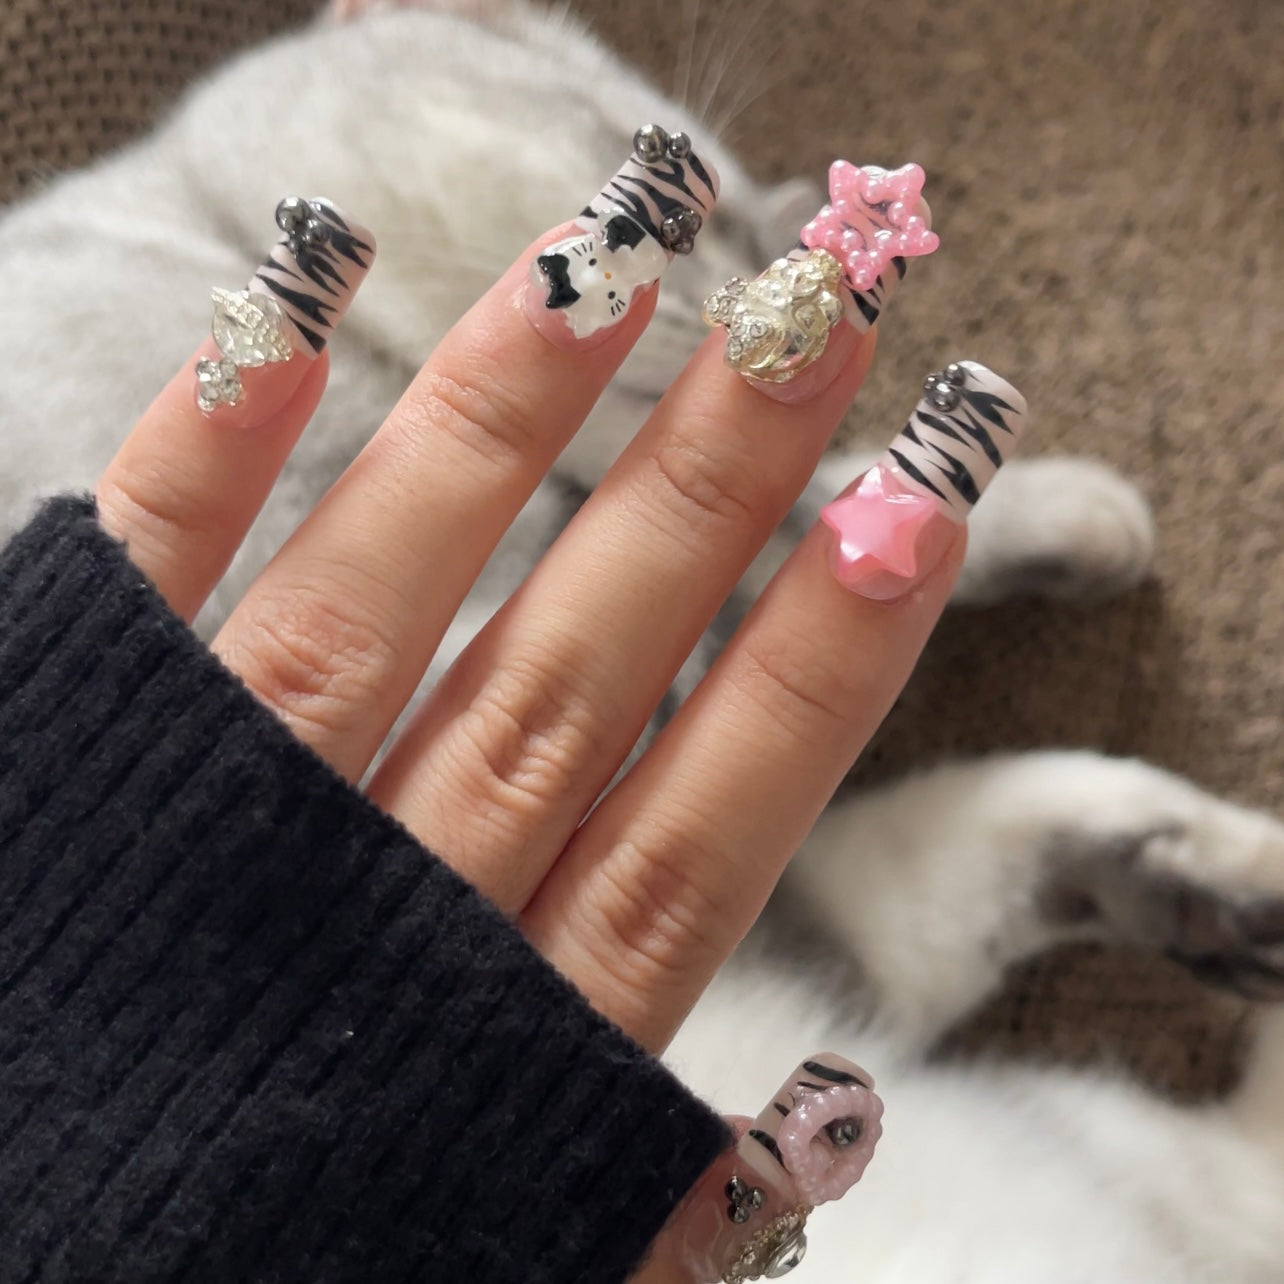 HELLO KITTY - TEN PIECES OF HANDCRAFTED PRESS ON NAIL